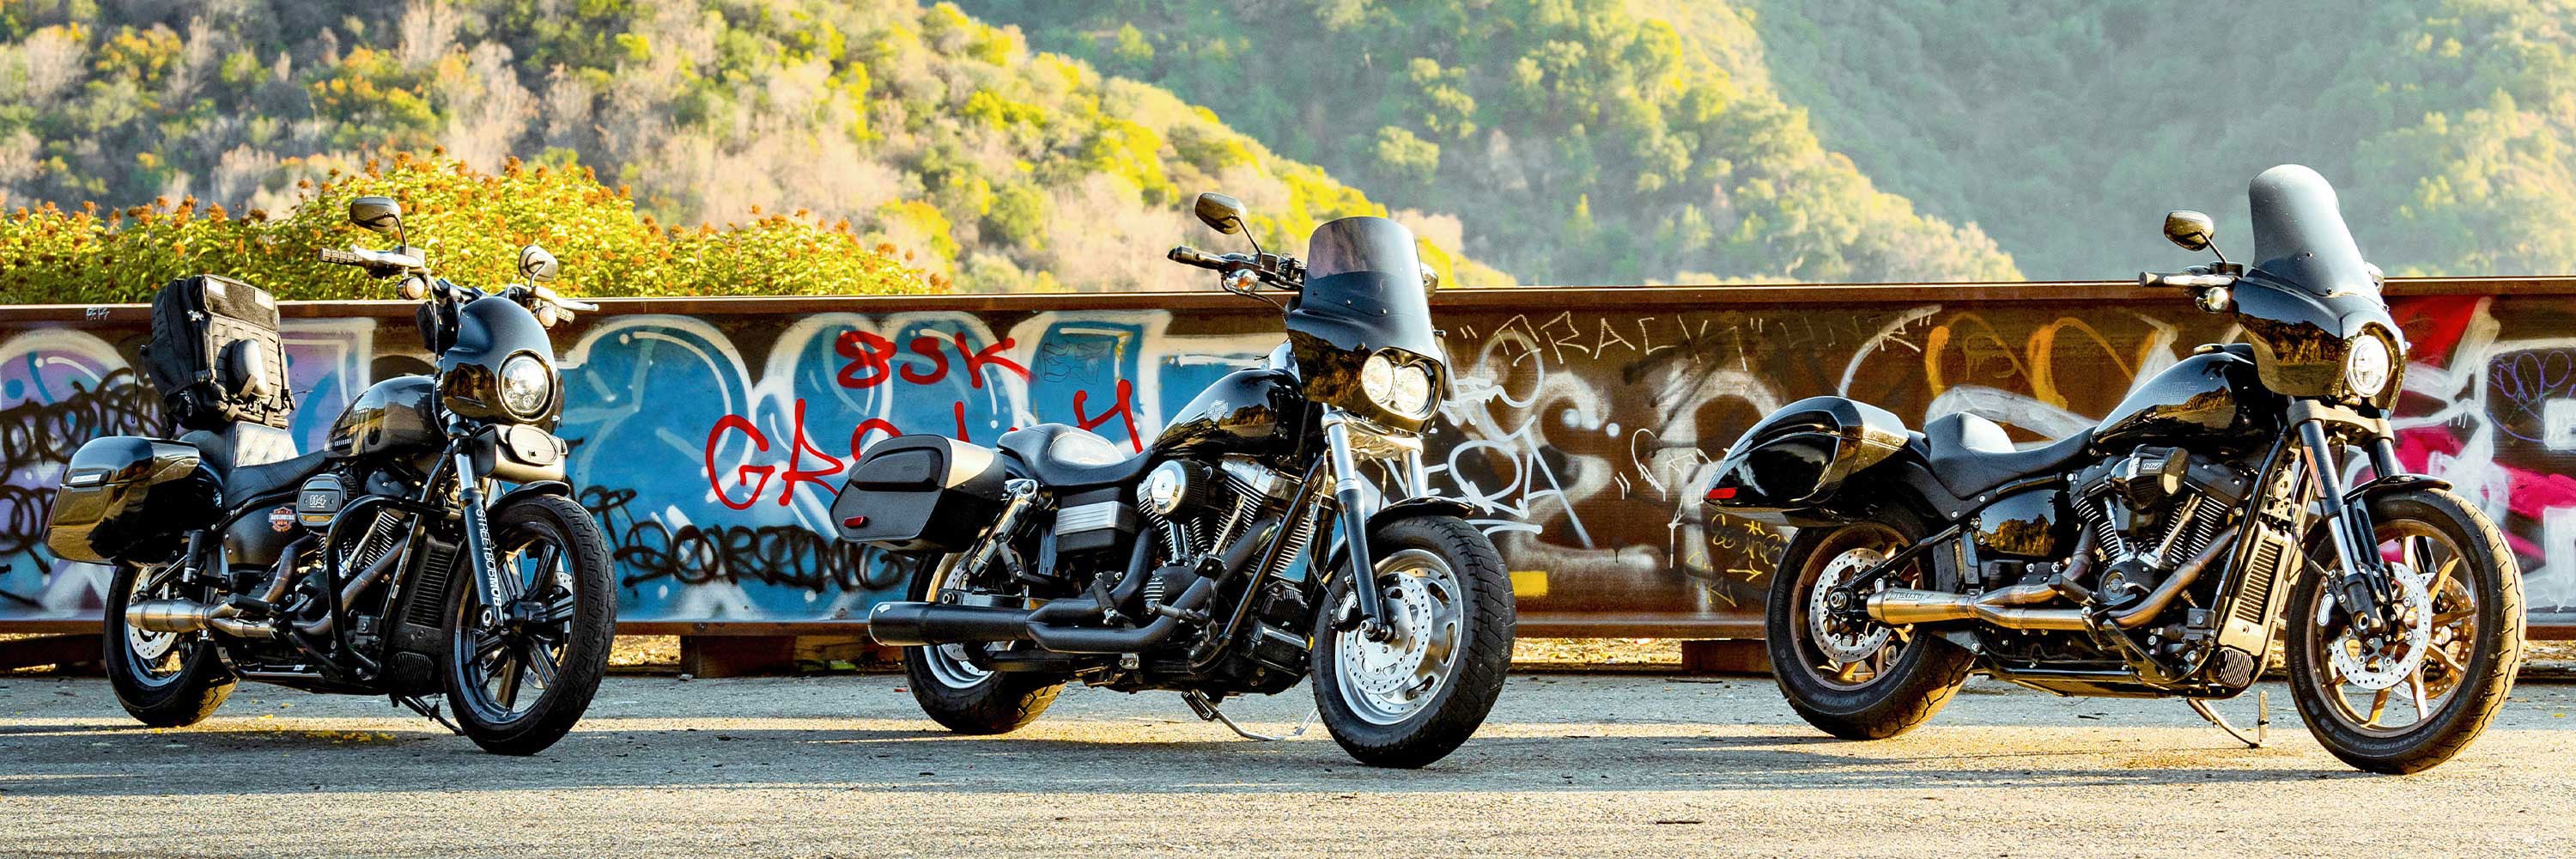 Triumph All Motorcycle Luggage Bags, Parts & Accessories By Bike